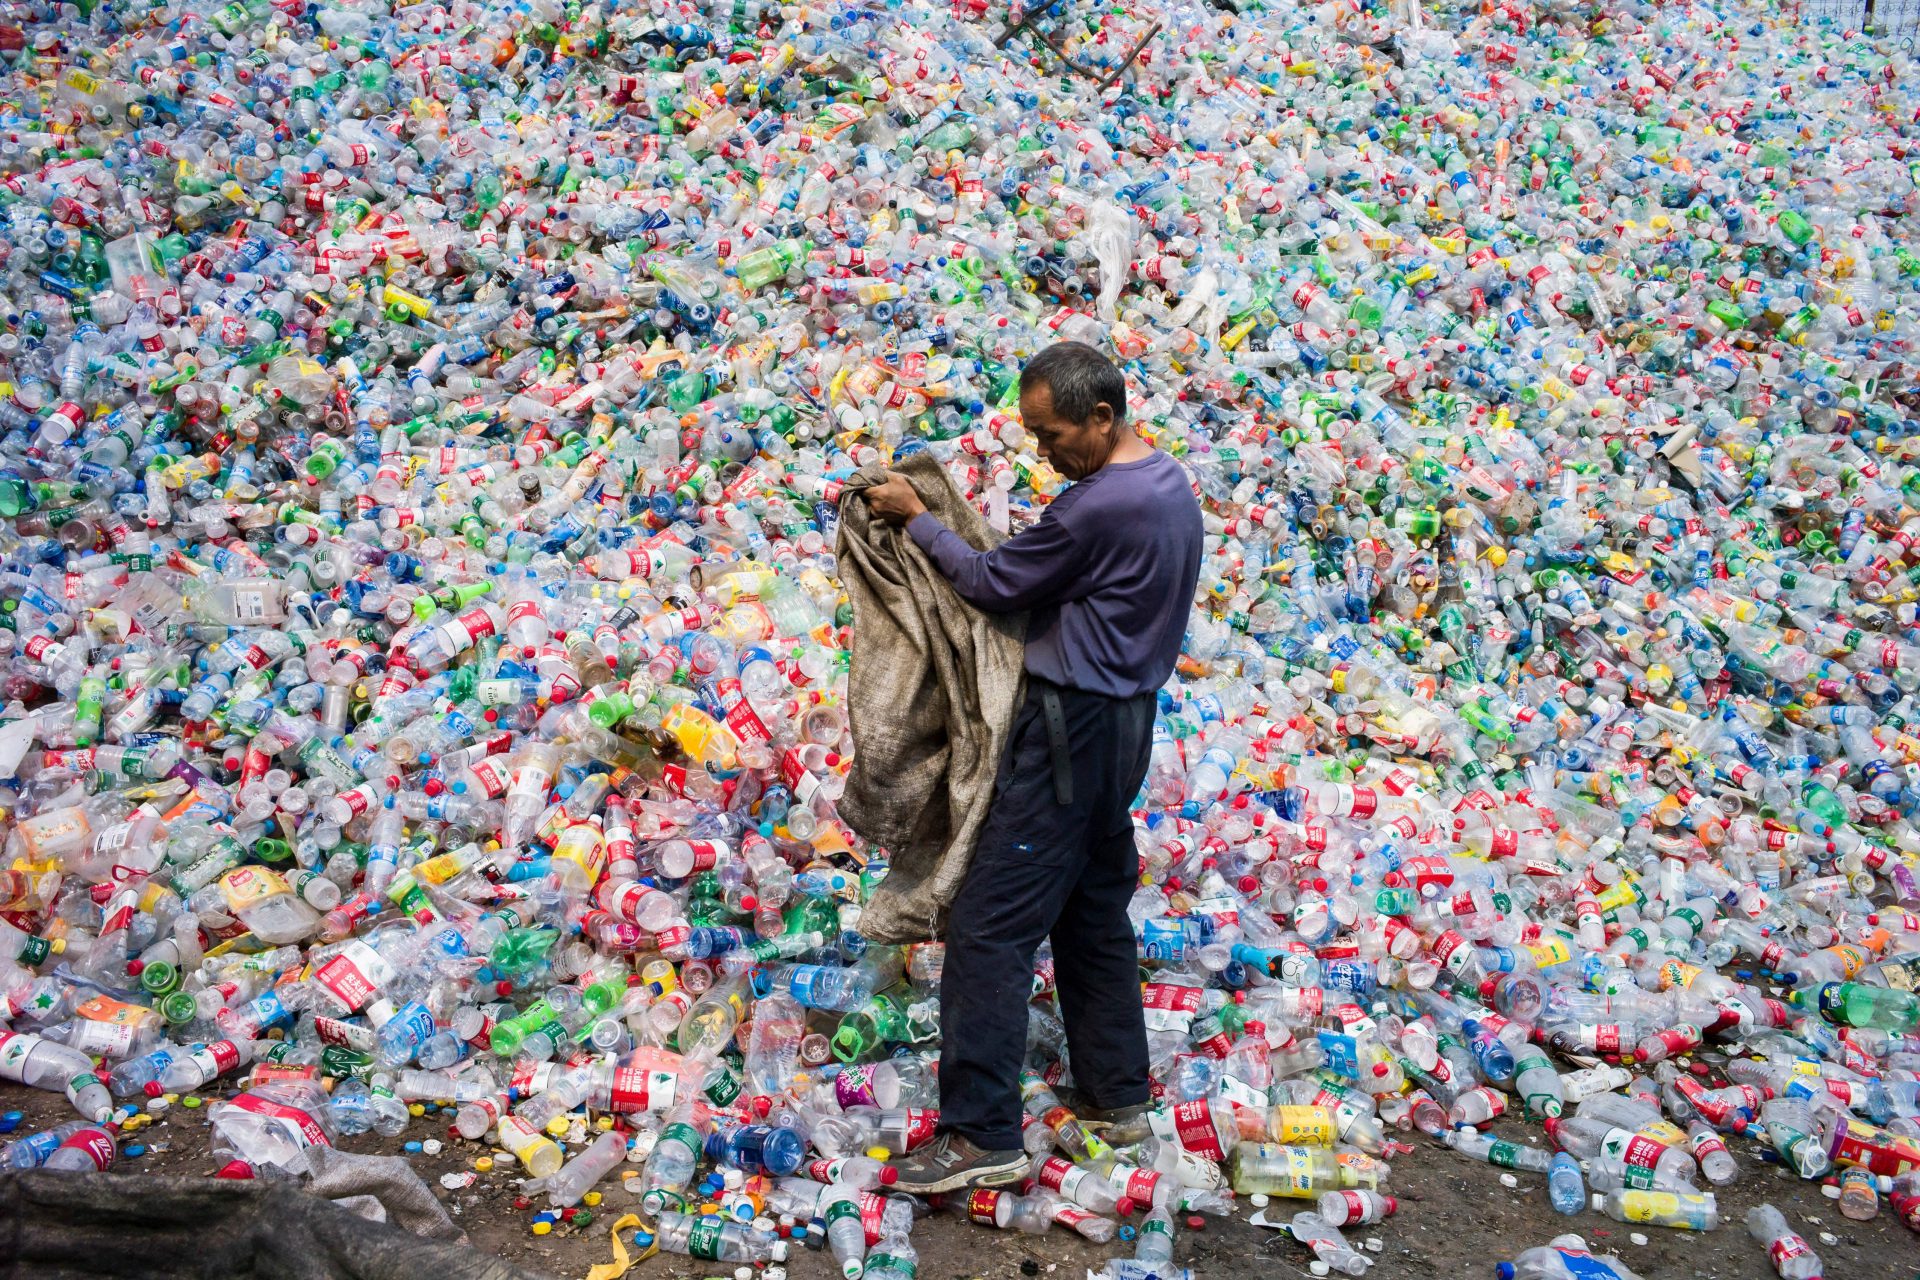 <p>Amidst a growing backlash against single-use plastics, the United Nations Environment Assembly initiated negotiations in 2022 for a Global Plastics Treaty to address the pervasive issue of plastic pollution. The goal is to have the treaty in place by the end of 2024, although progress has been limited thus far. In response to the slow international efforts, individuals are turning to new legal avenues, suing plastics manufacturers for damages.</p>